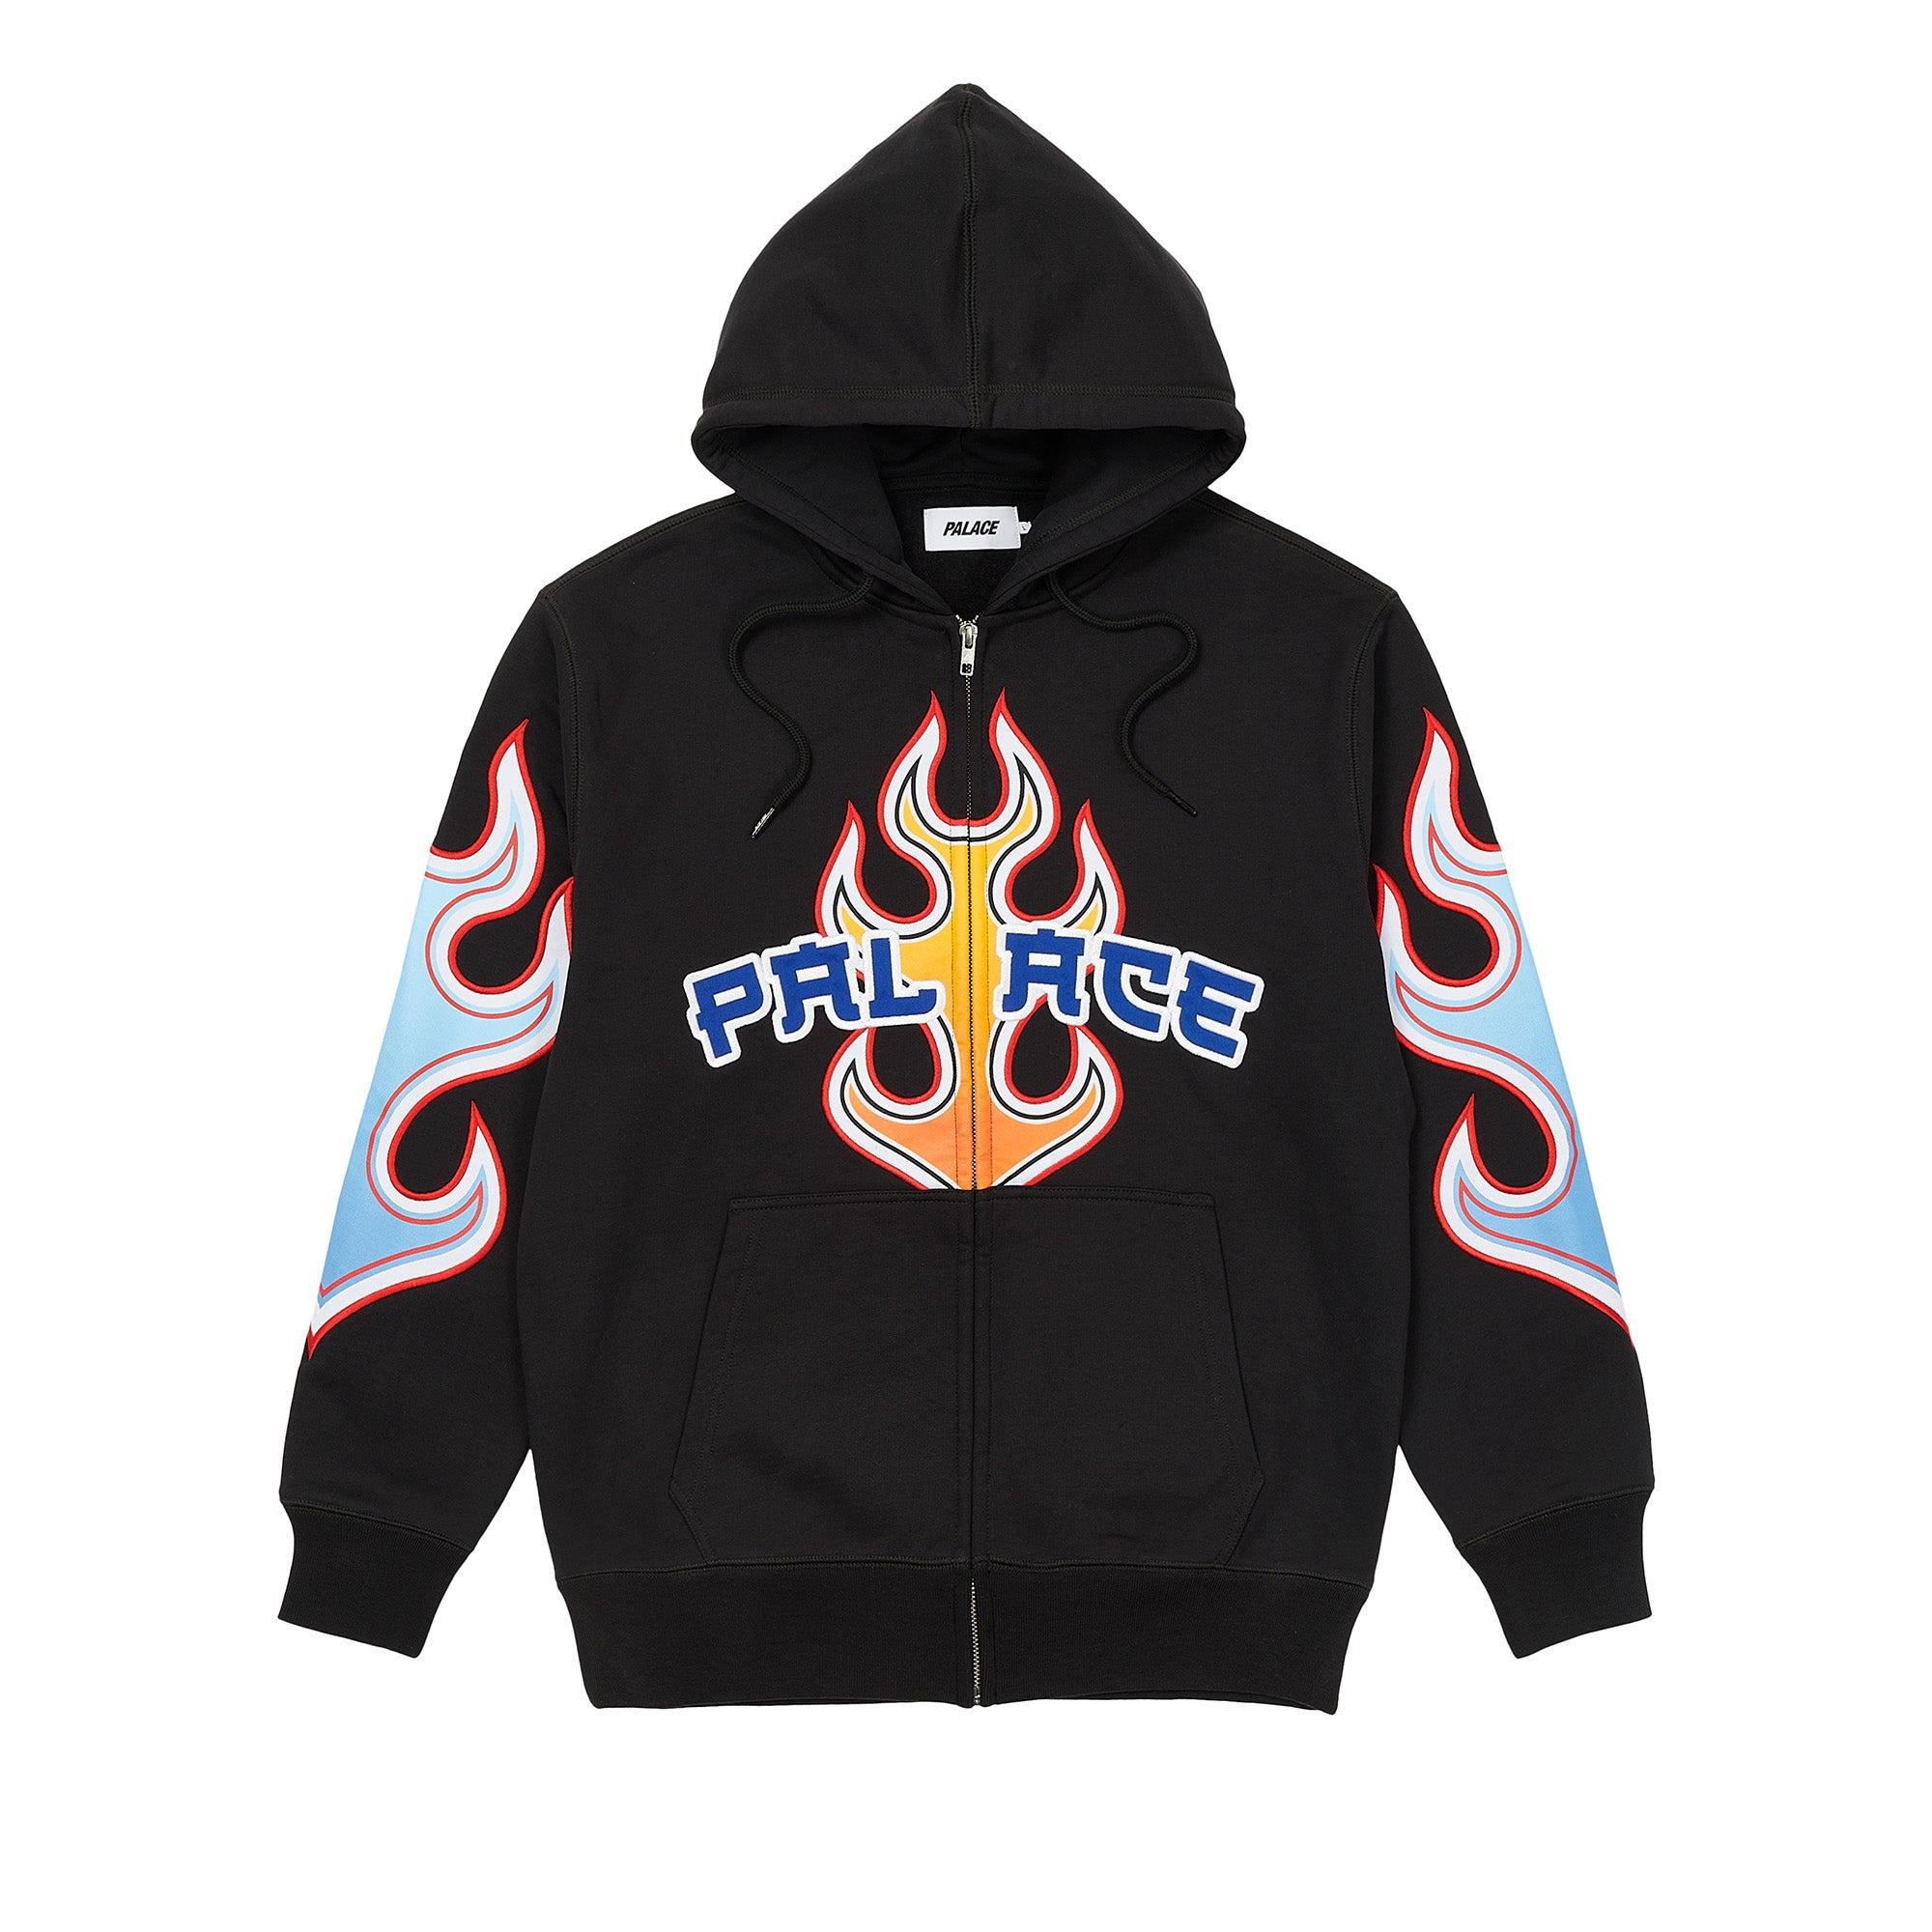 Palace Flame Zip Hoodie (Black) by PALACE | jellibeans